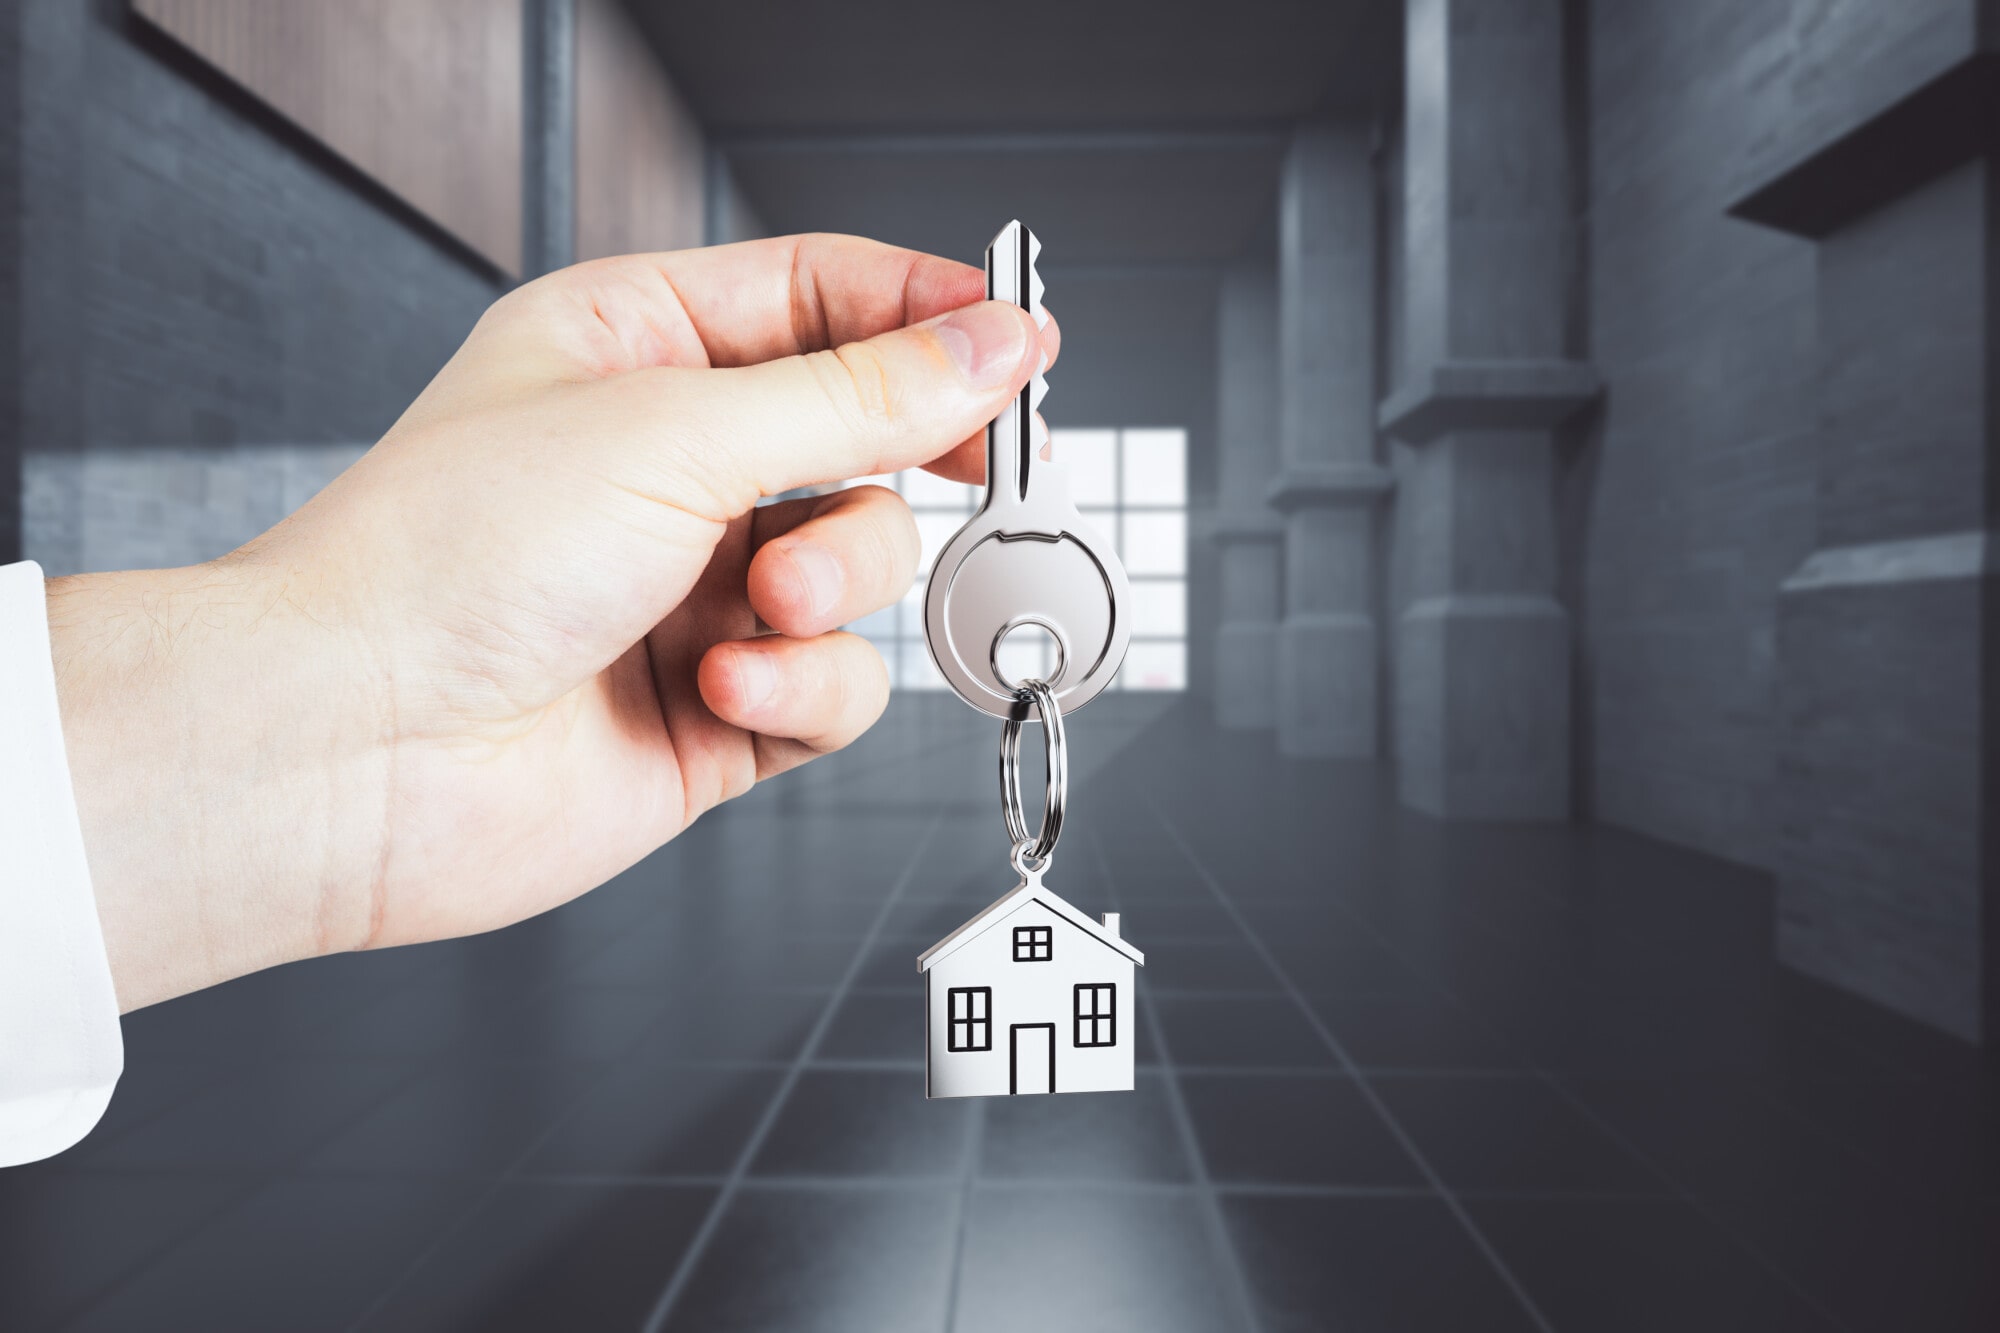 How to Find Private Landlords